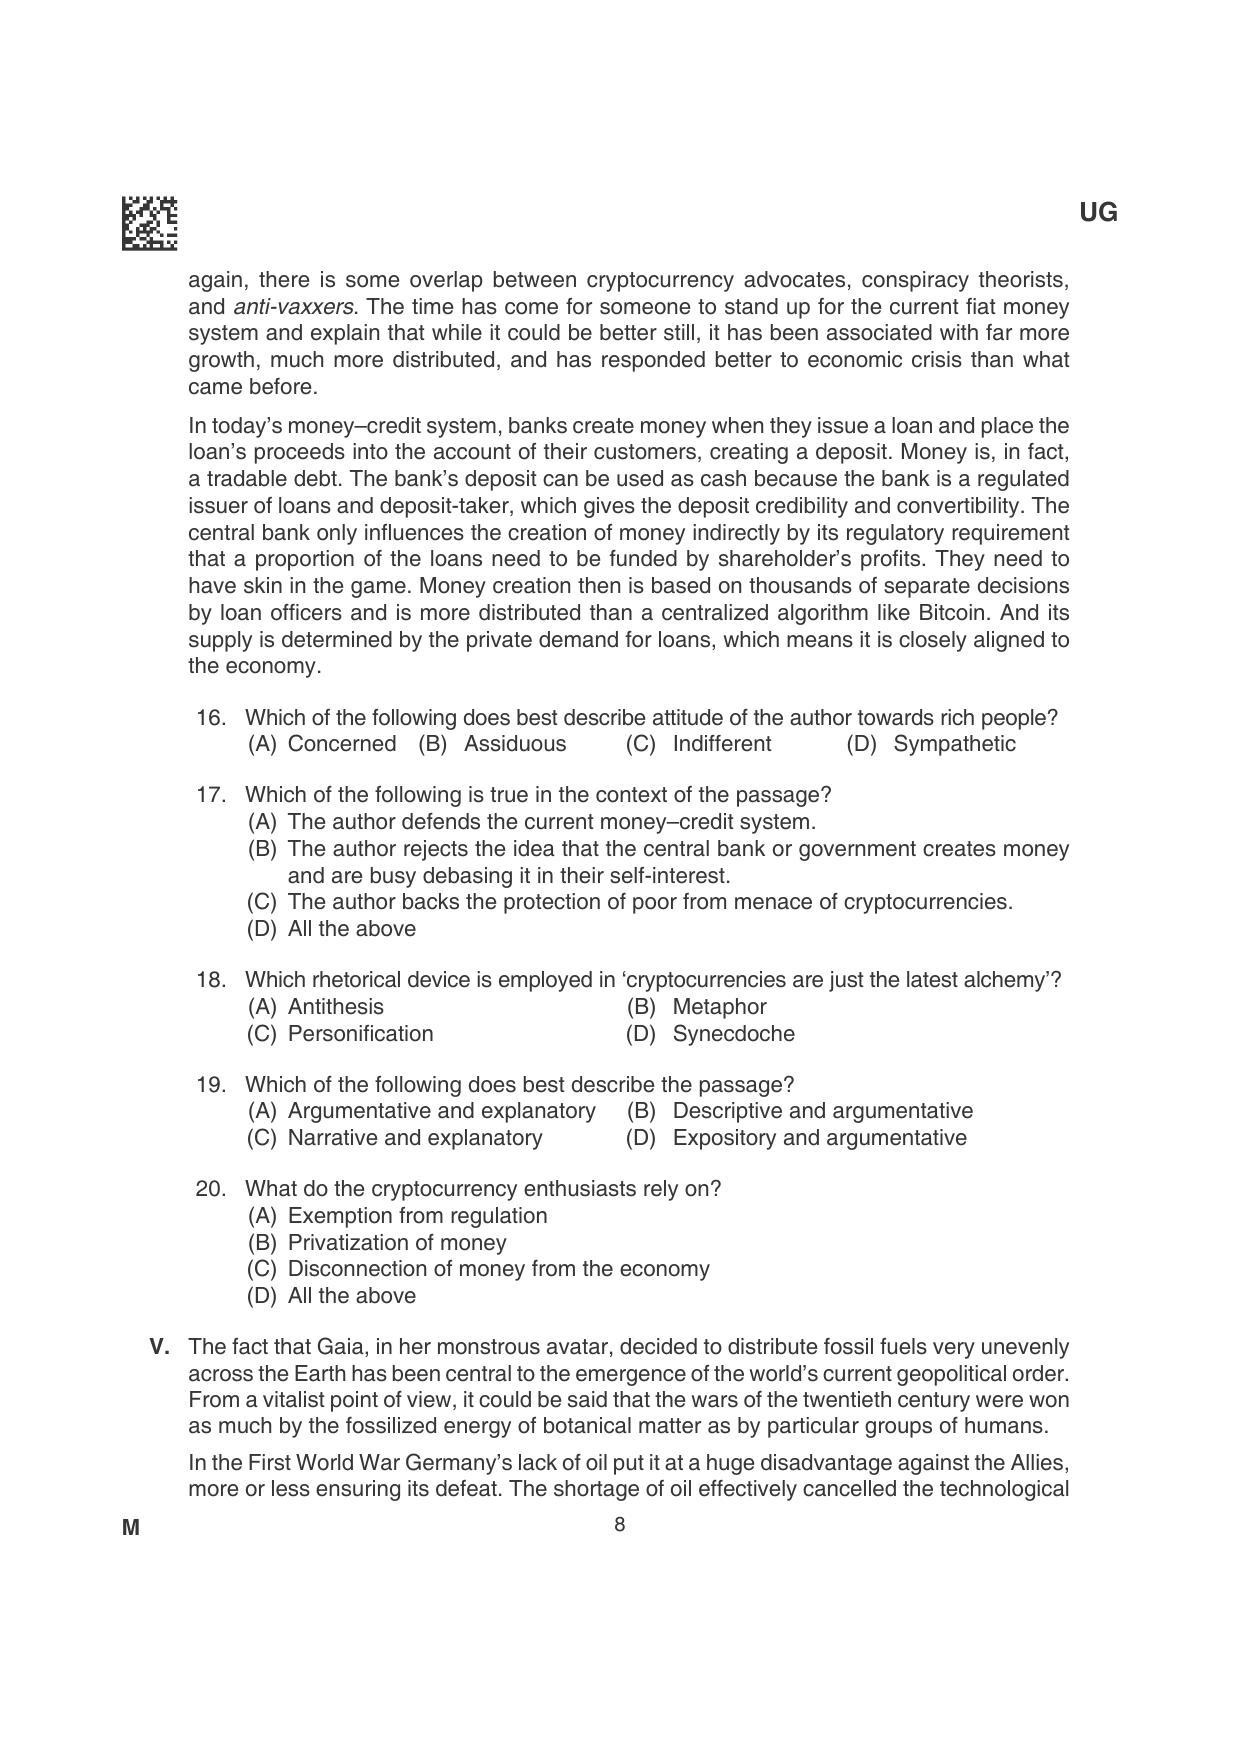 CLAT 2022 UG Question Papers - Page 8